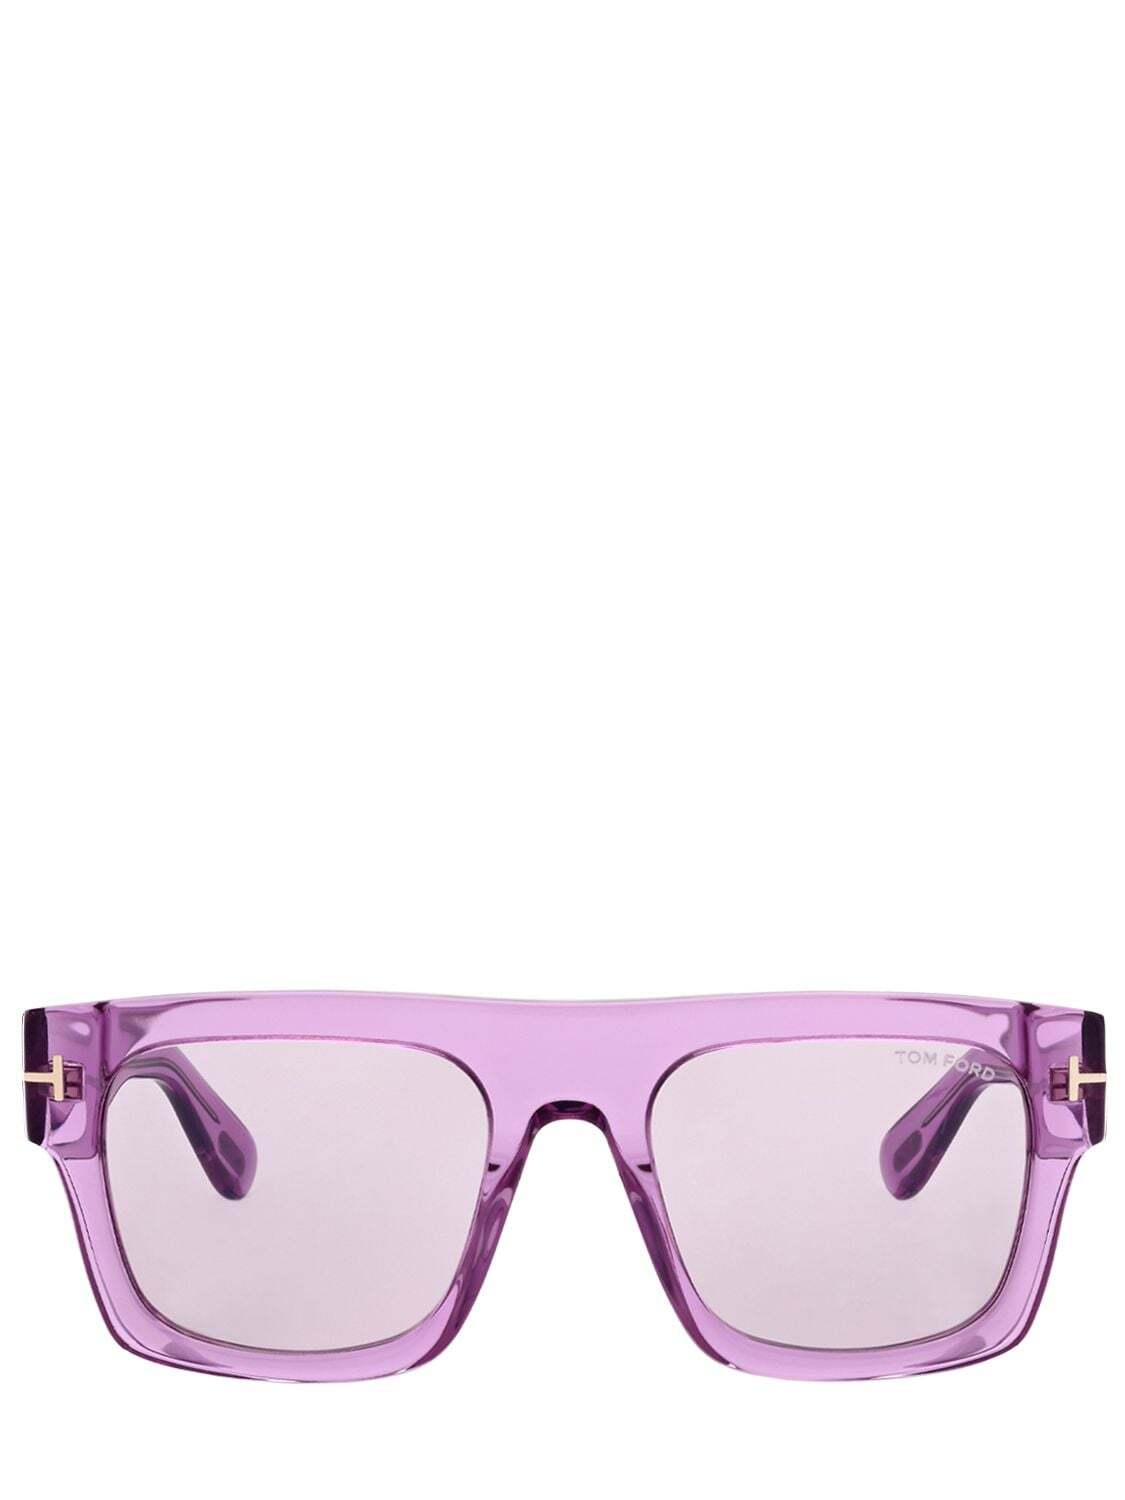 TOM FORD Fausto Squared Acetate Sunglasses in rose / violet